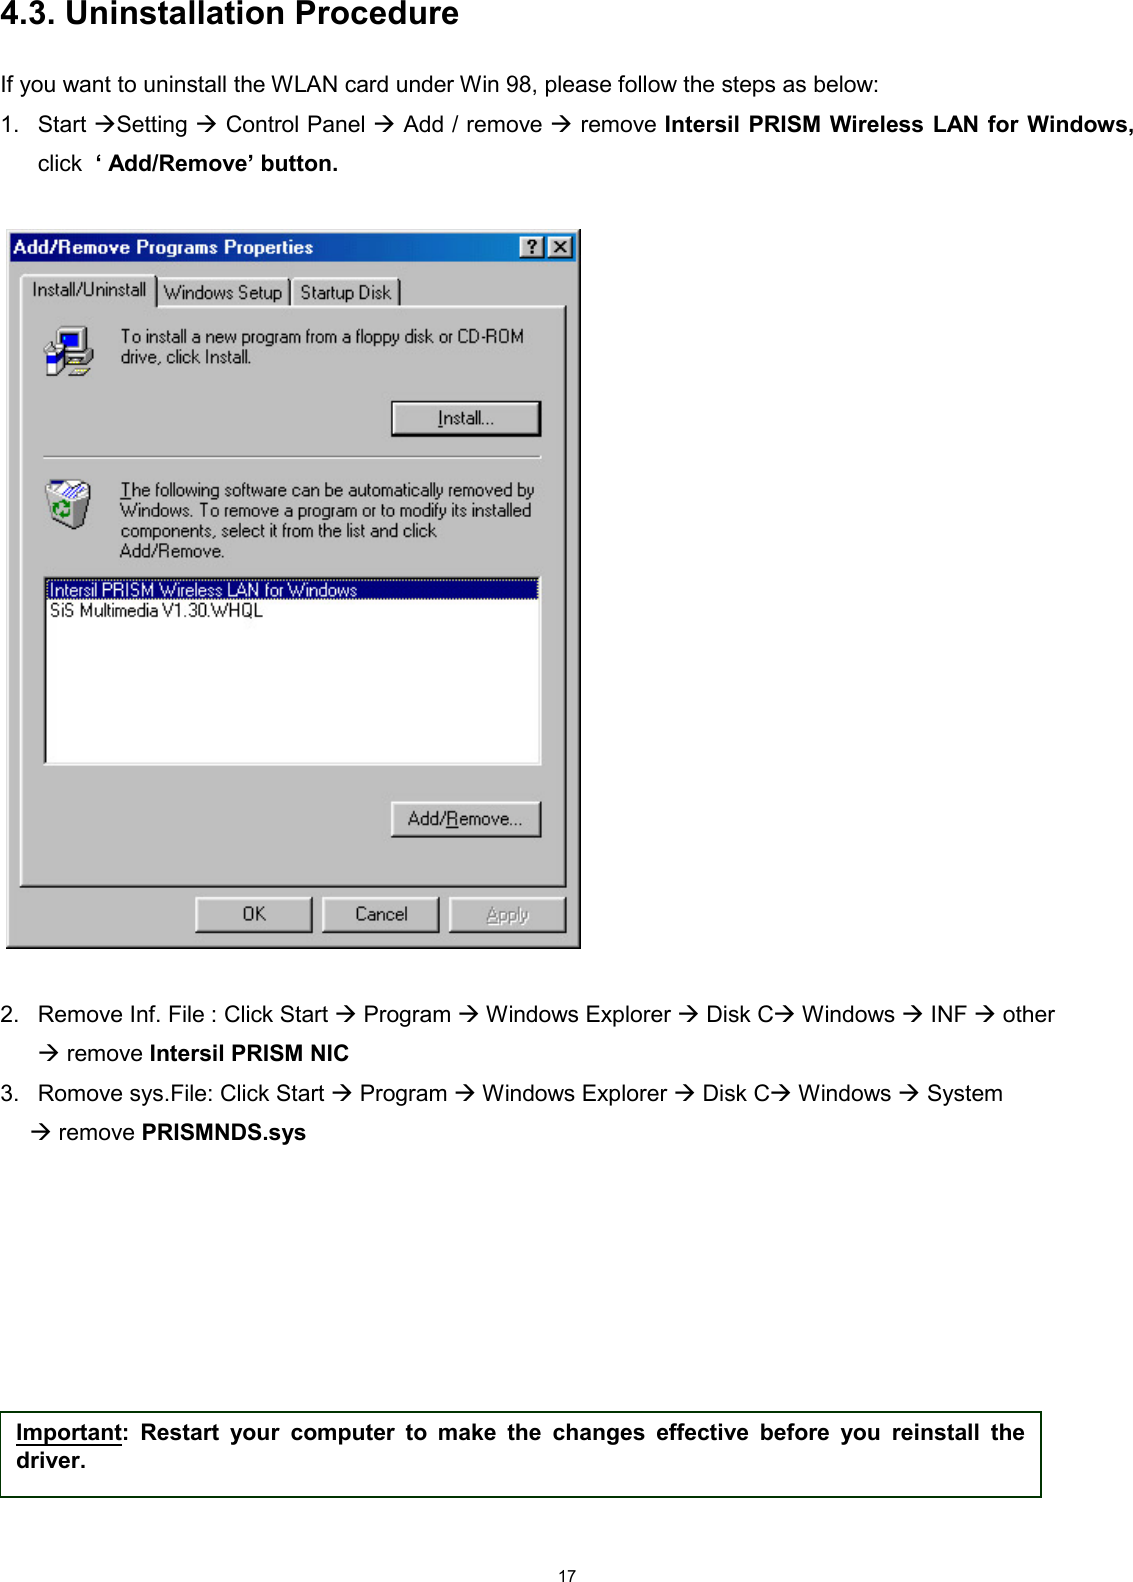  17 4.3. Uninstallation Procedure  If you want to uninstall the WLAN card under Win 98, please follow the steps as below: 1. Start Setting  Control Panel  Add / remove  remove Intersil PRISM Wireless LAN for Windows, click  ‘ Add/Remove’ button.     2.  Remove Inf. File : Click Start  Program  Windows Explorer  Disk C Windows  INF  other   remove Intersil PRISM NIC  3.  Romove sys.File: Click Start  Program  Windows Explorer  Disk C Windows  System   remove PRISMNDS.sys                 Important: Restart your computer to make the changes effective before you reinstall thedriver. 